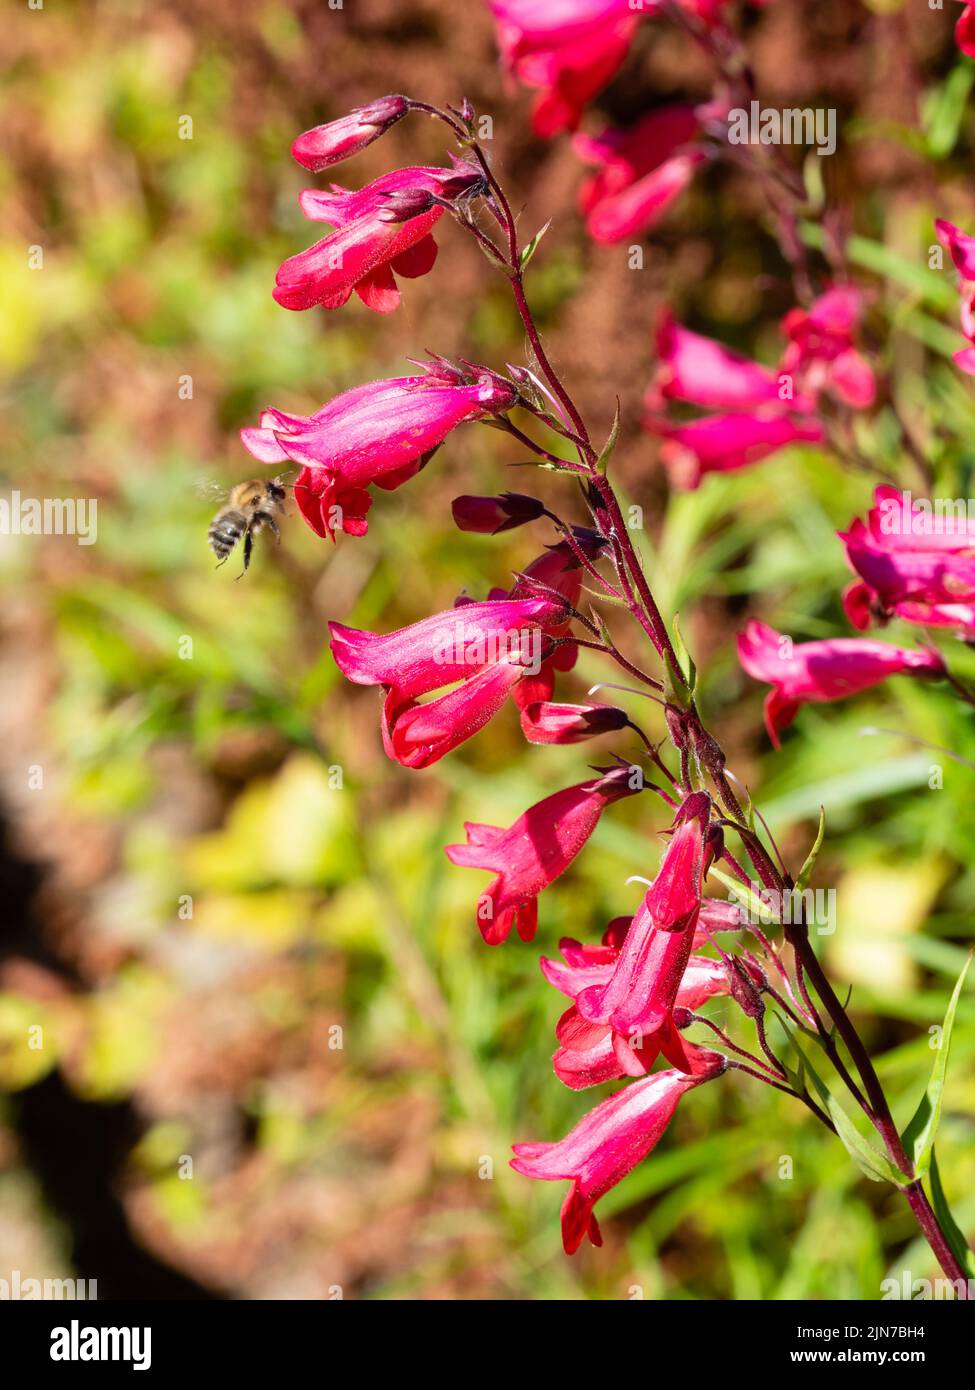 Tubular pink, insect attracting flowers of the hardy perennial sub shrub, Penstemon 'Firebird' Stock Photo